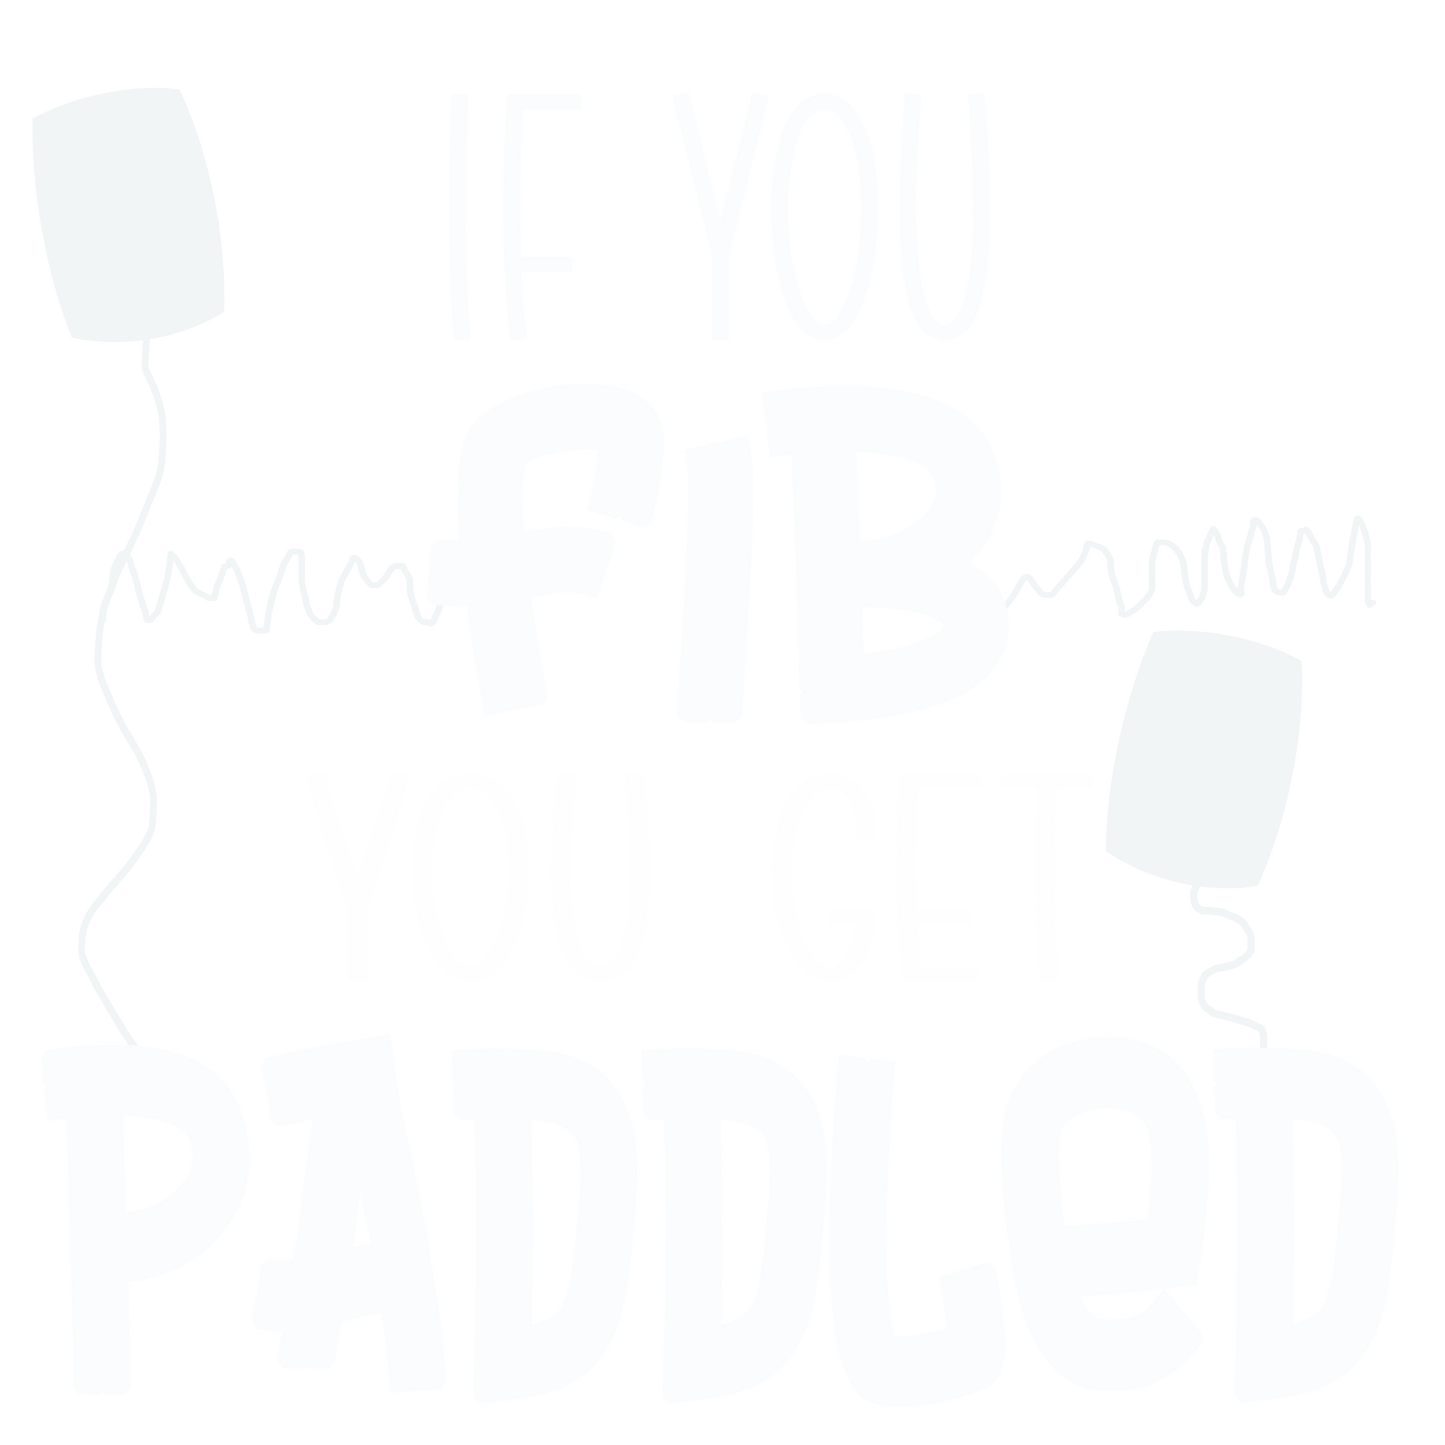 IF YOU FIB YOU GET PADDLED